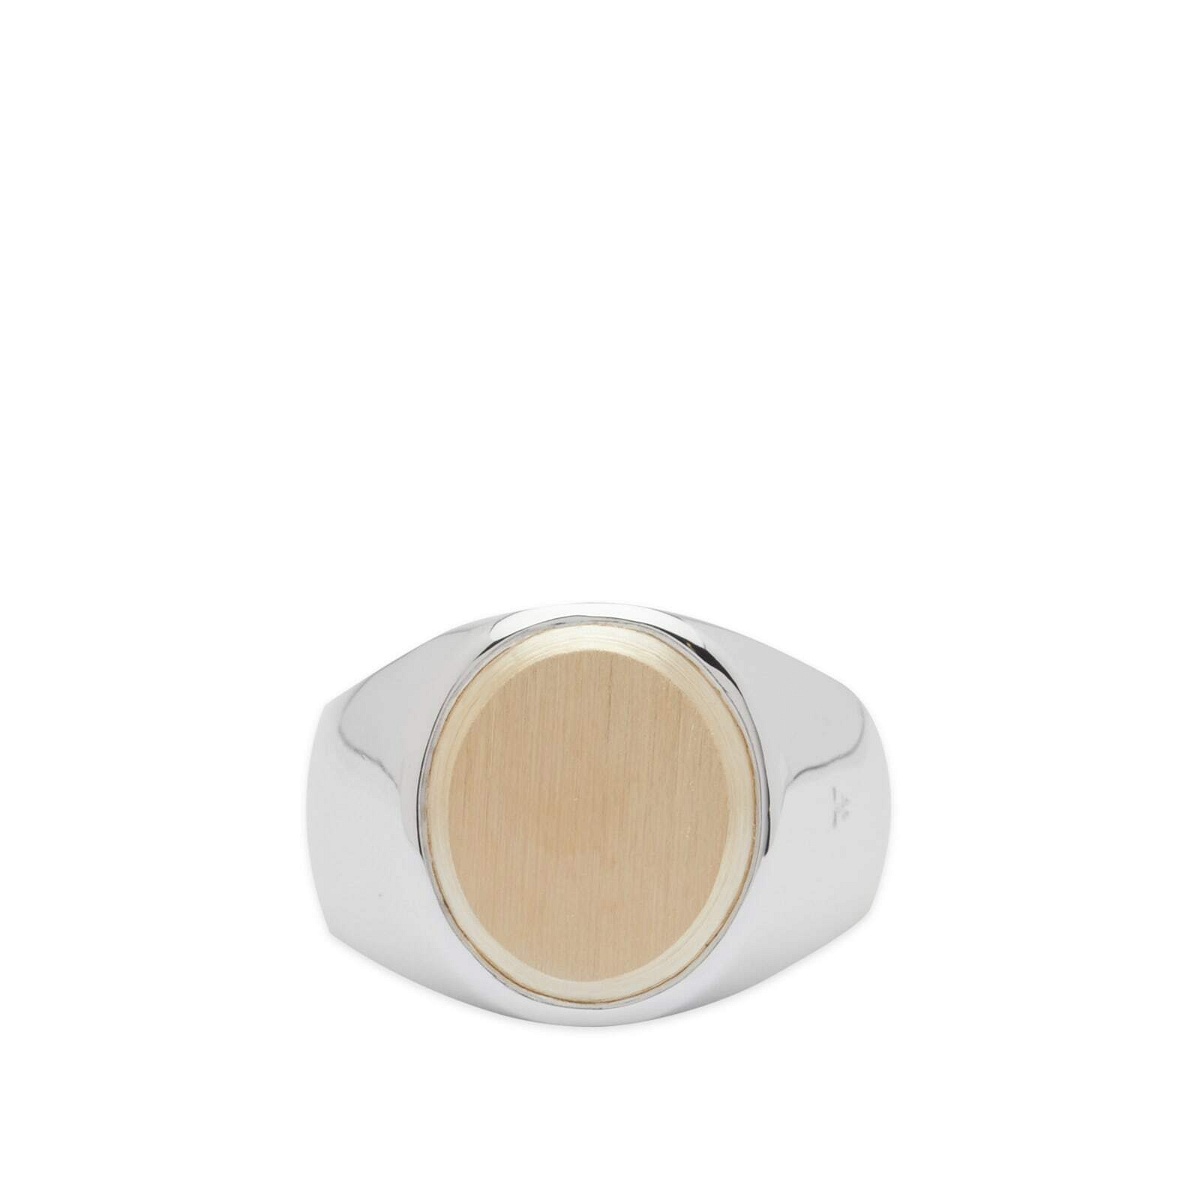 Tom Wood Men's Oval Gold Top Ring M in 925 Sterling Silver Tom Wood